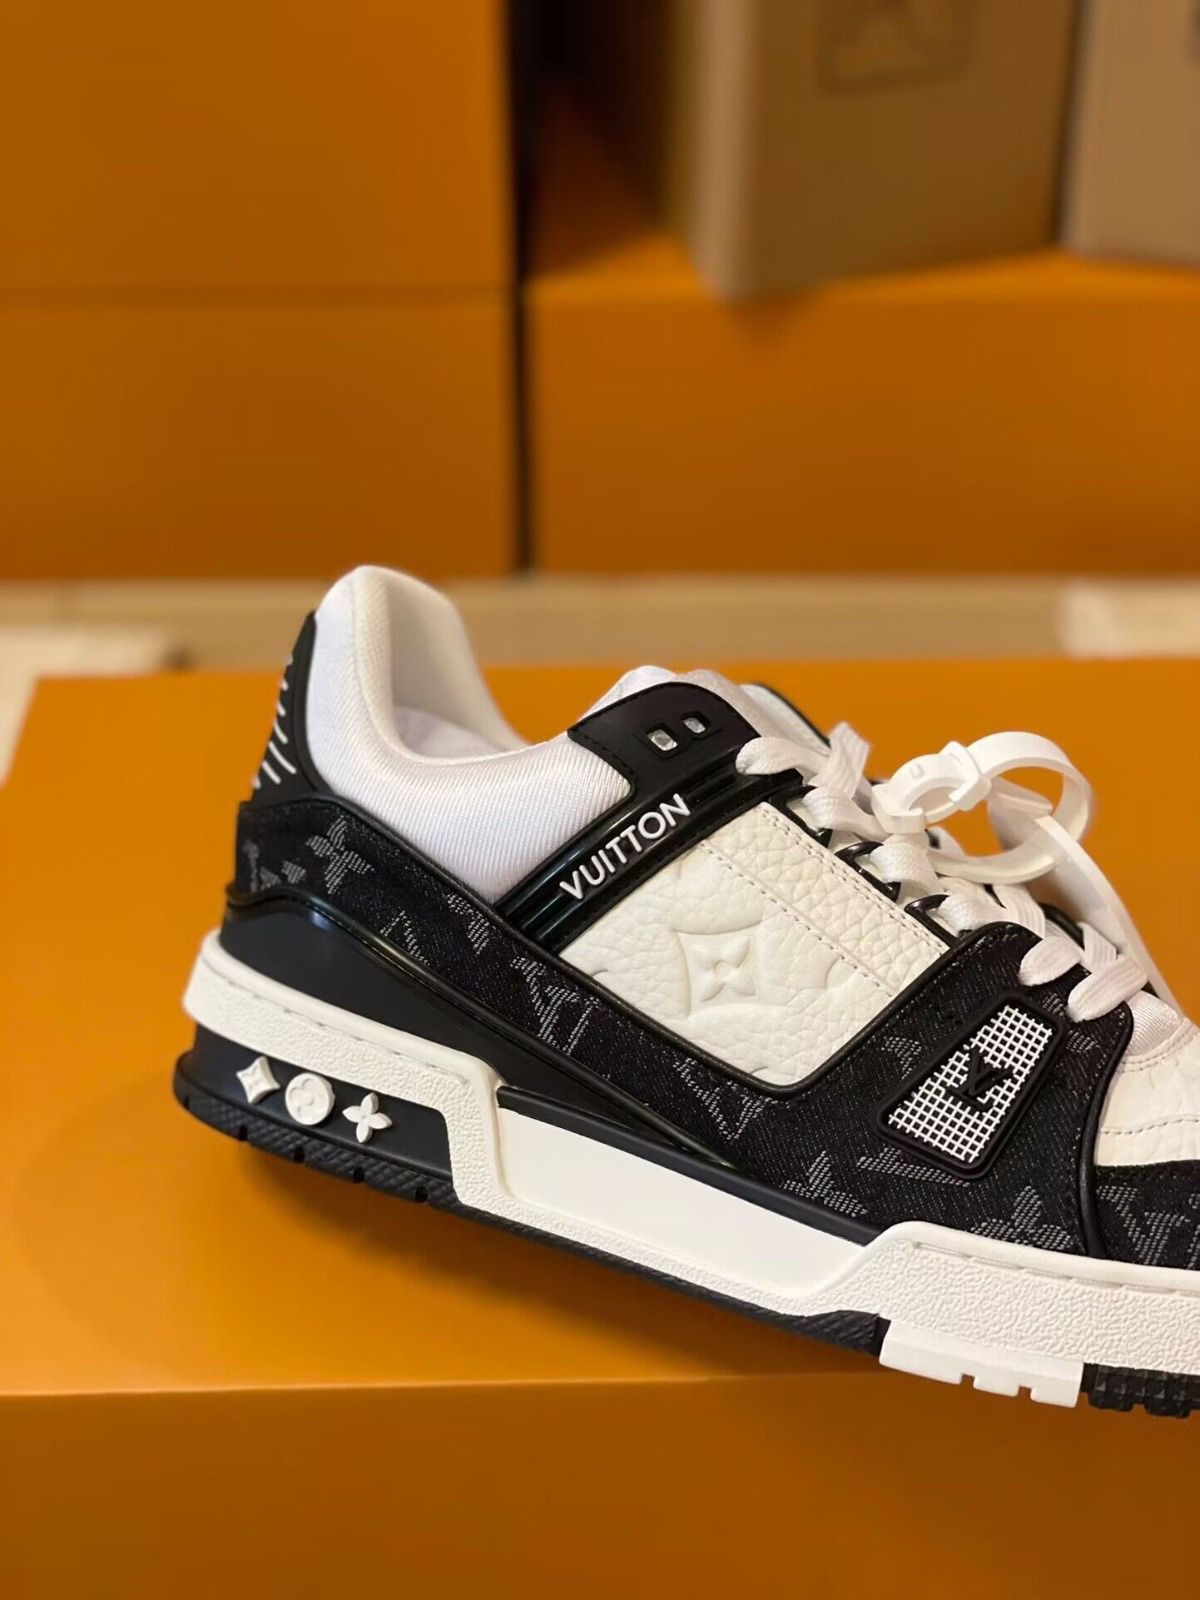 LV Trainer Shoes Black And White Size 13 for Sale in Lawrence, MA